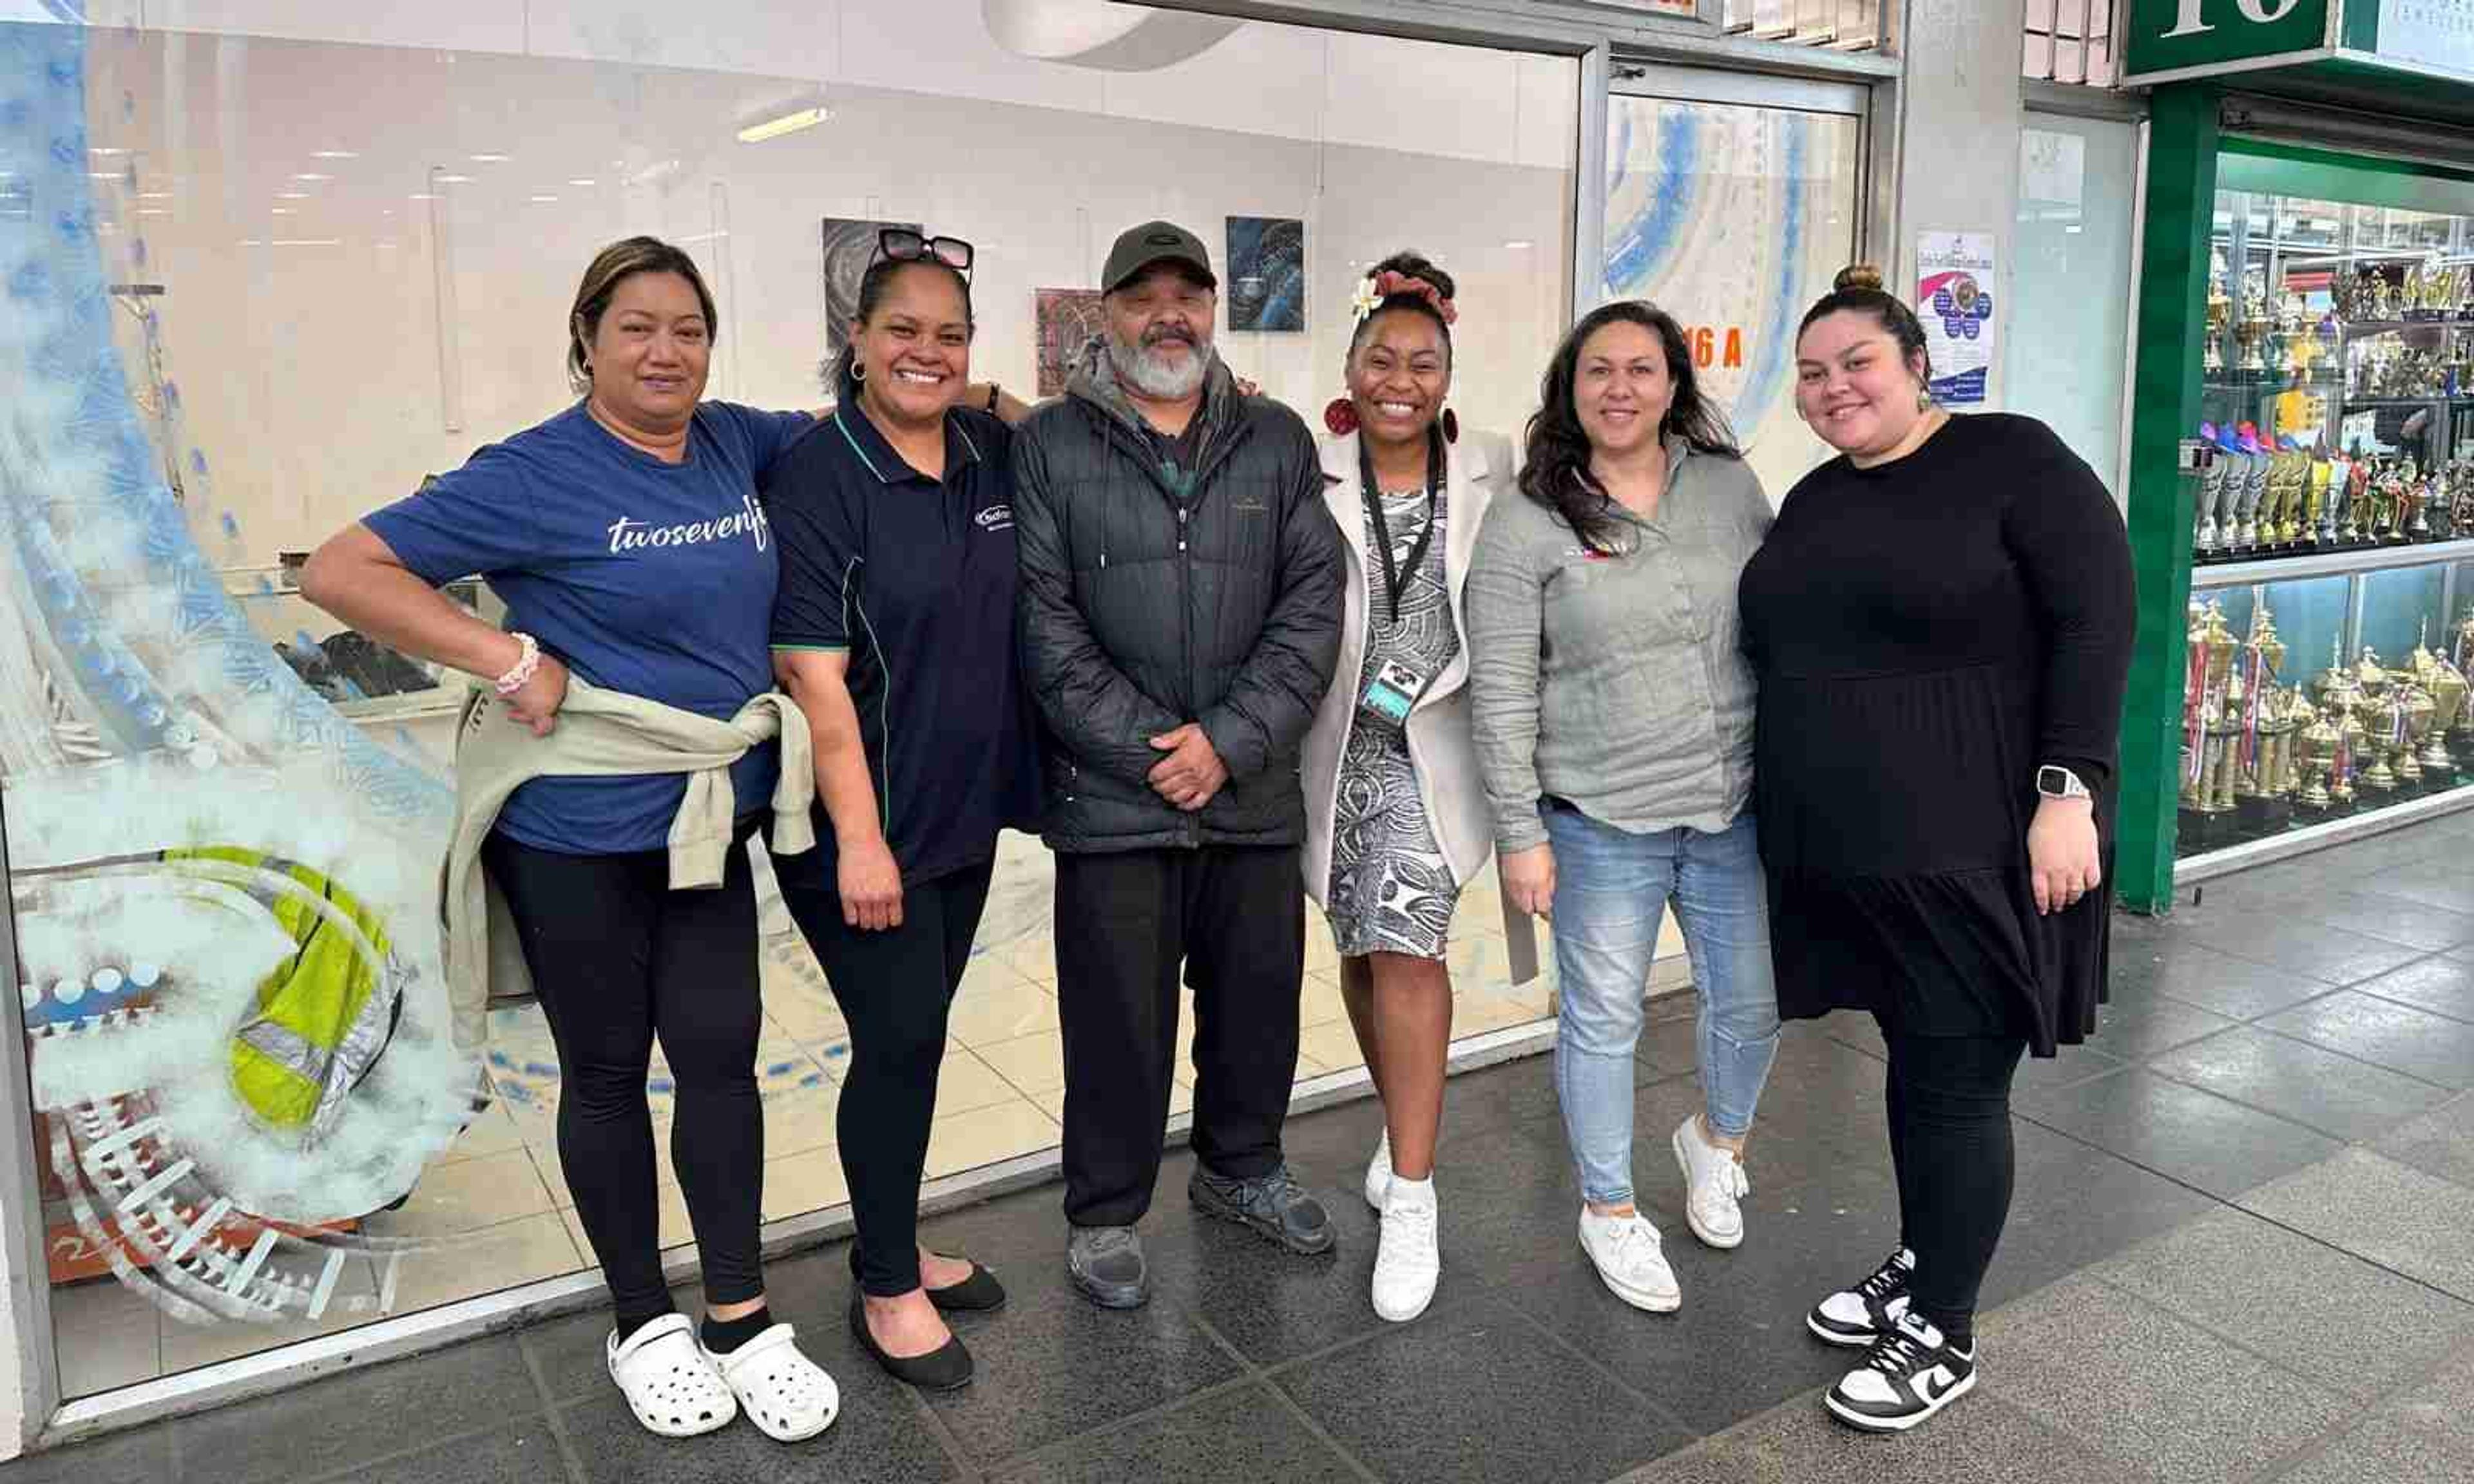 From left, Ema Manase from Emz Pineapple Pies, Margaret Langi from Marlina's Cookies, Troy Ikiua Jackson from Savage Designs, Ernestina Bonsu-Maro from EBM Artistry, Toni Helleur from I Am Mangere and Lillie Refiti from Golden Gardenia.